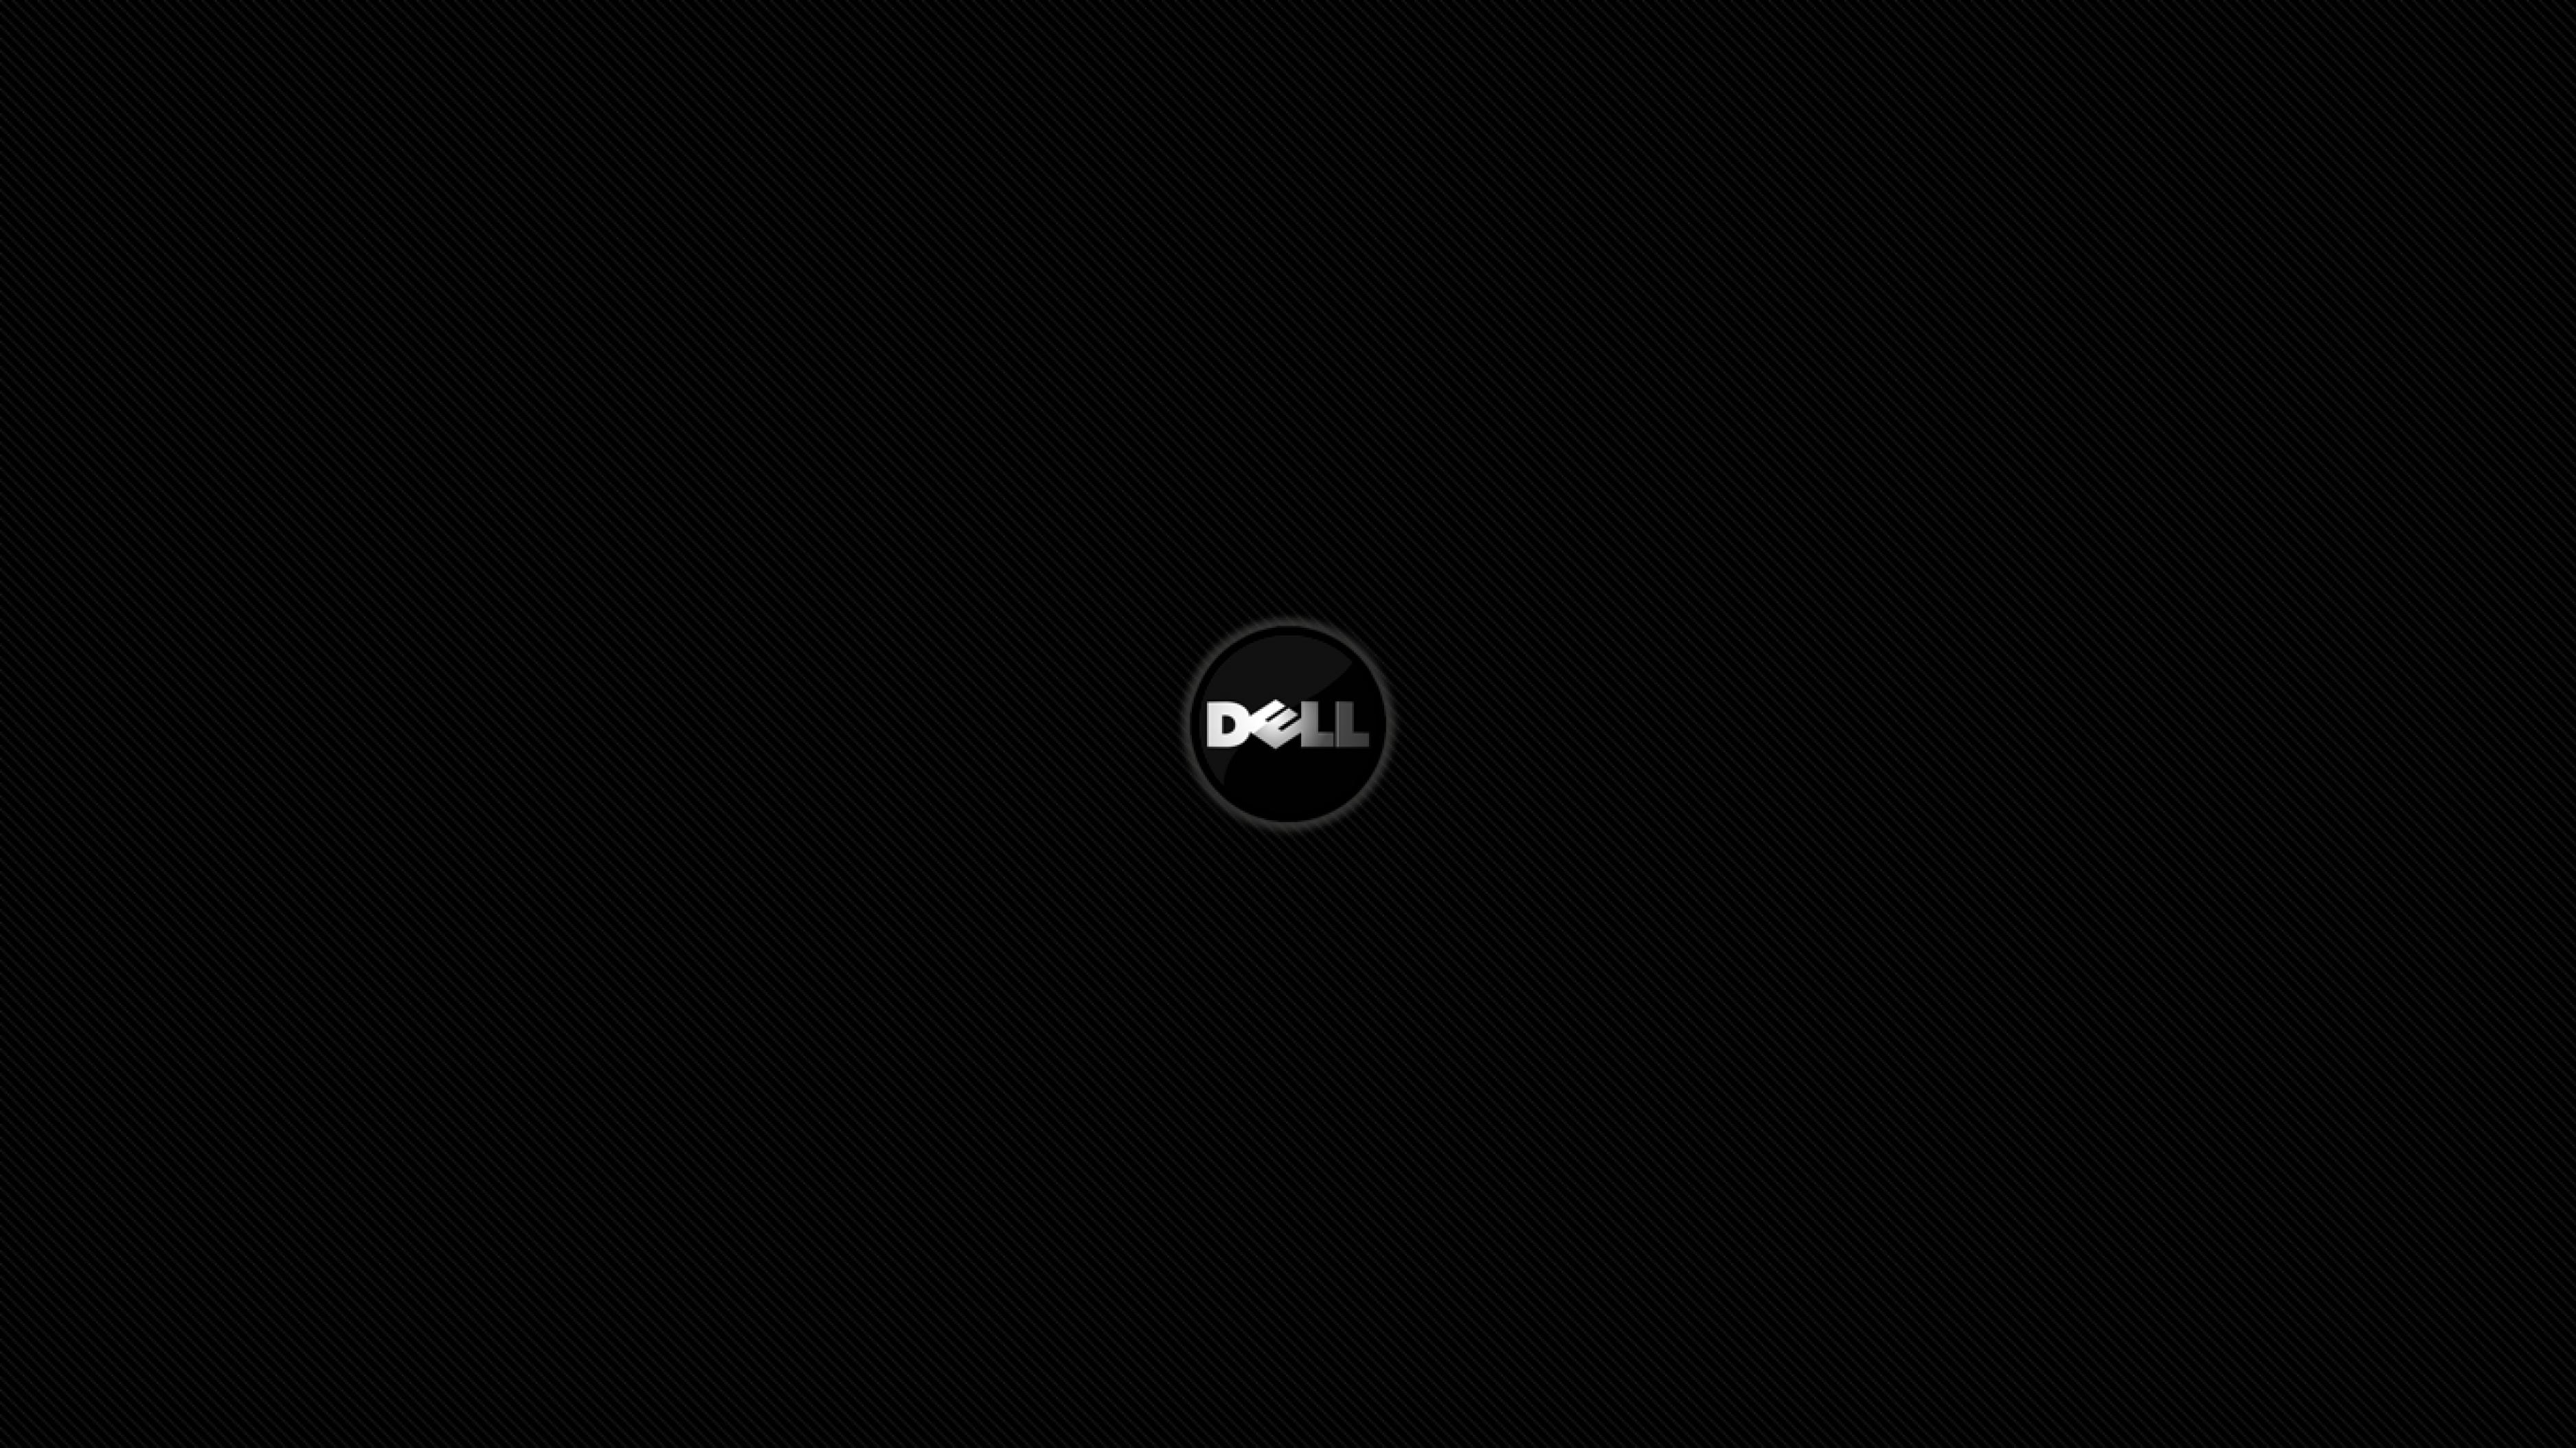 Dell Background Free Download